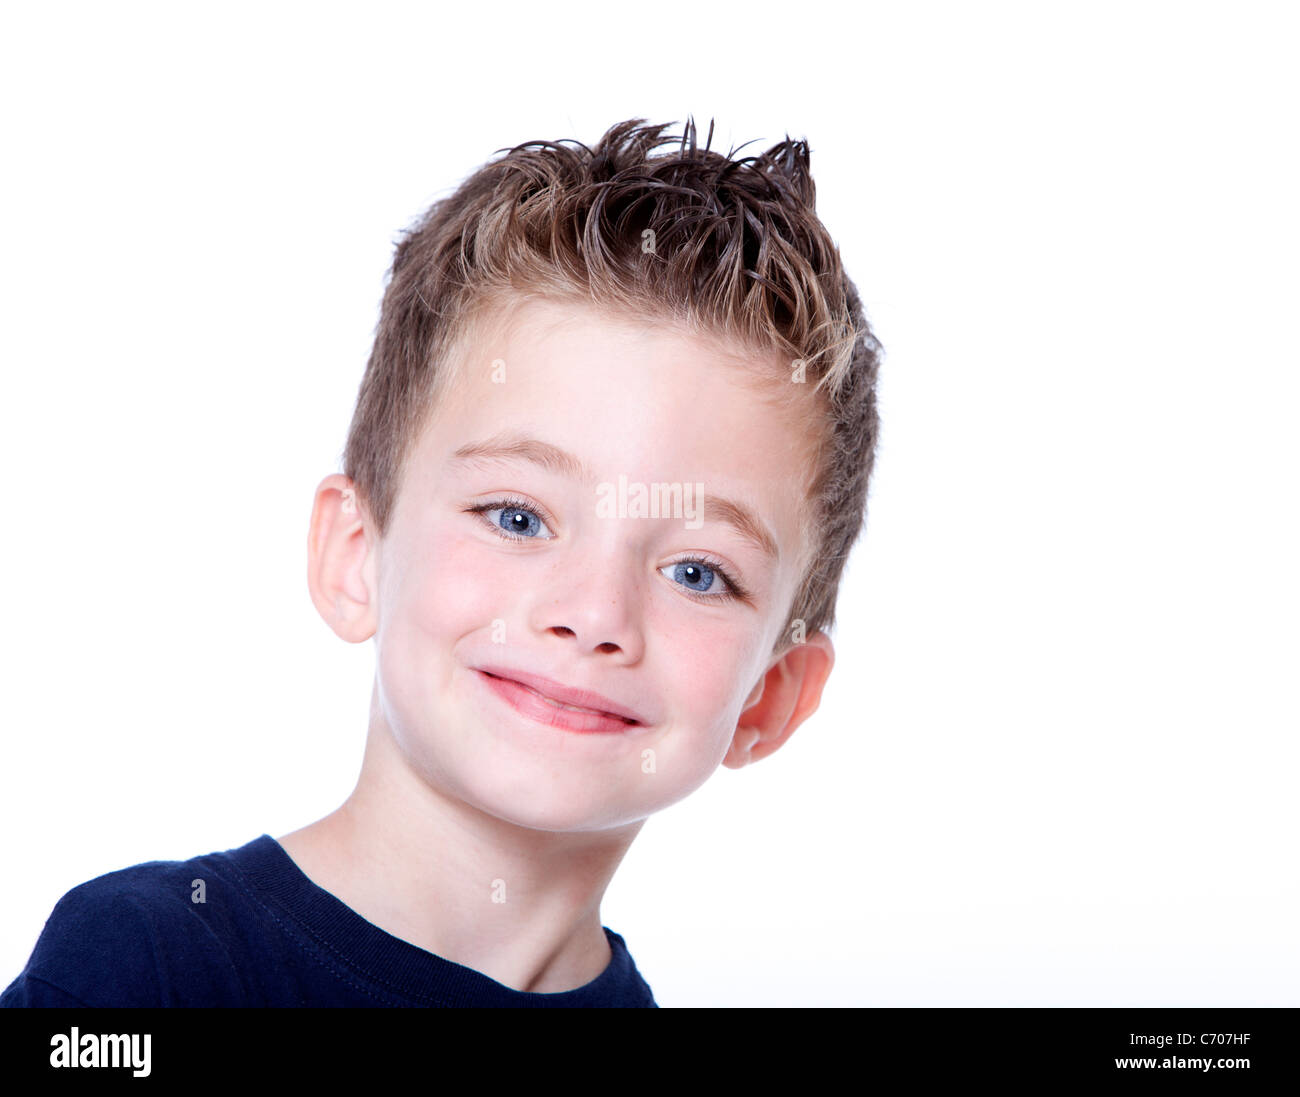 Young happy boy portrait on white background Stock Photo